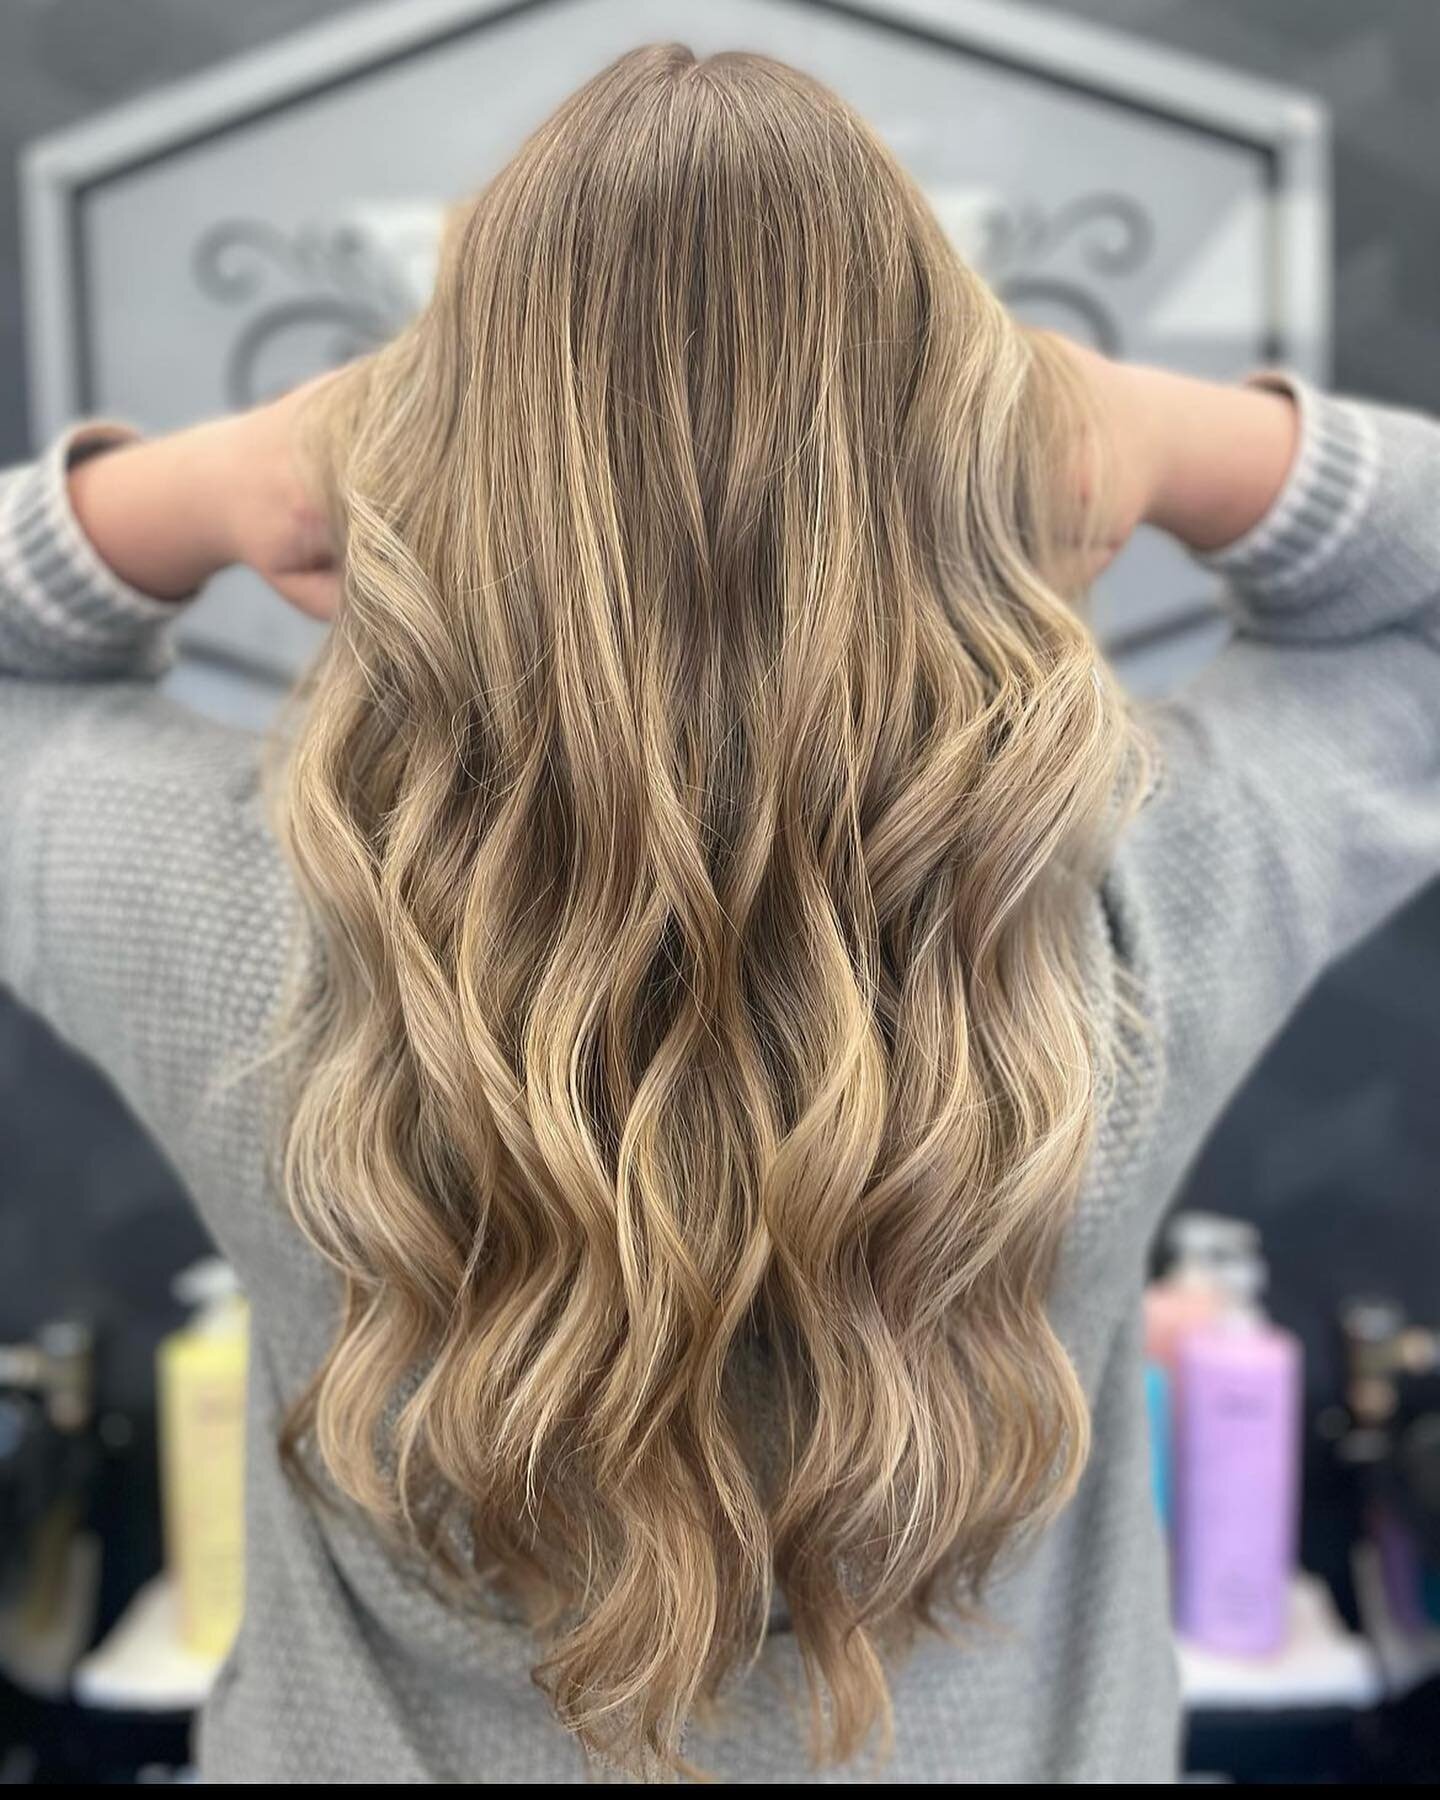 She&rsquo;s back!! 

This beautiful blonde was done by our amazing @brianna_beautyhub who&rsquo;s back and more ready than ever to transform your hair! 

Call us today to set up an appointment or a consultation.
We can&rsquo;t wait to hear from you!
